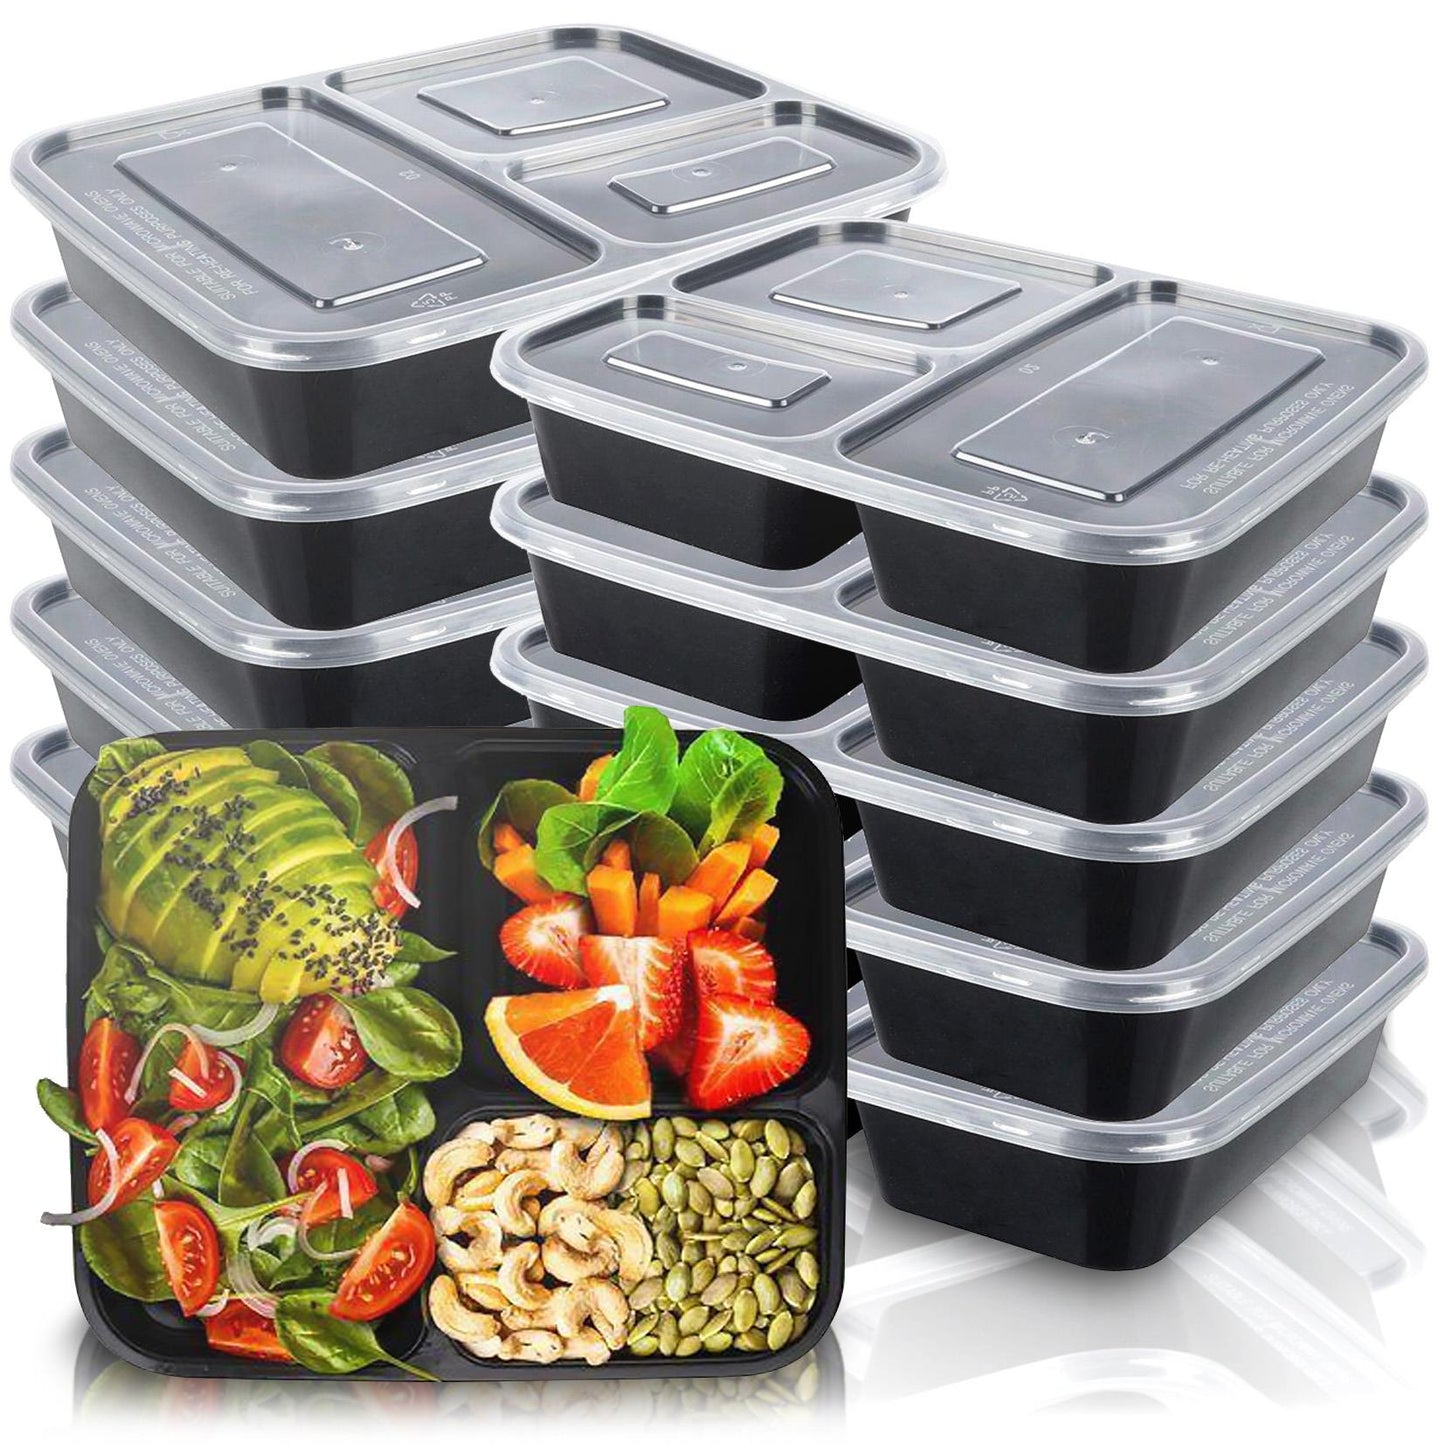 Set of 10 Meal Prep Food Storage with 3 Compartments by Geezy - UKBuyZone